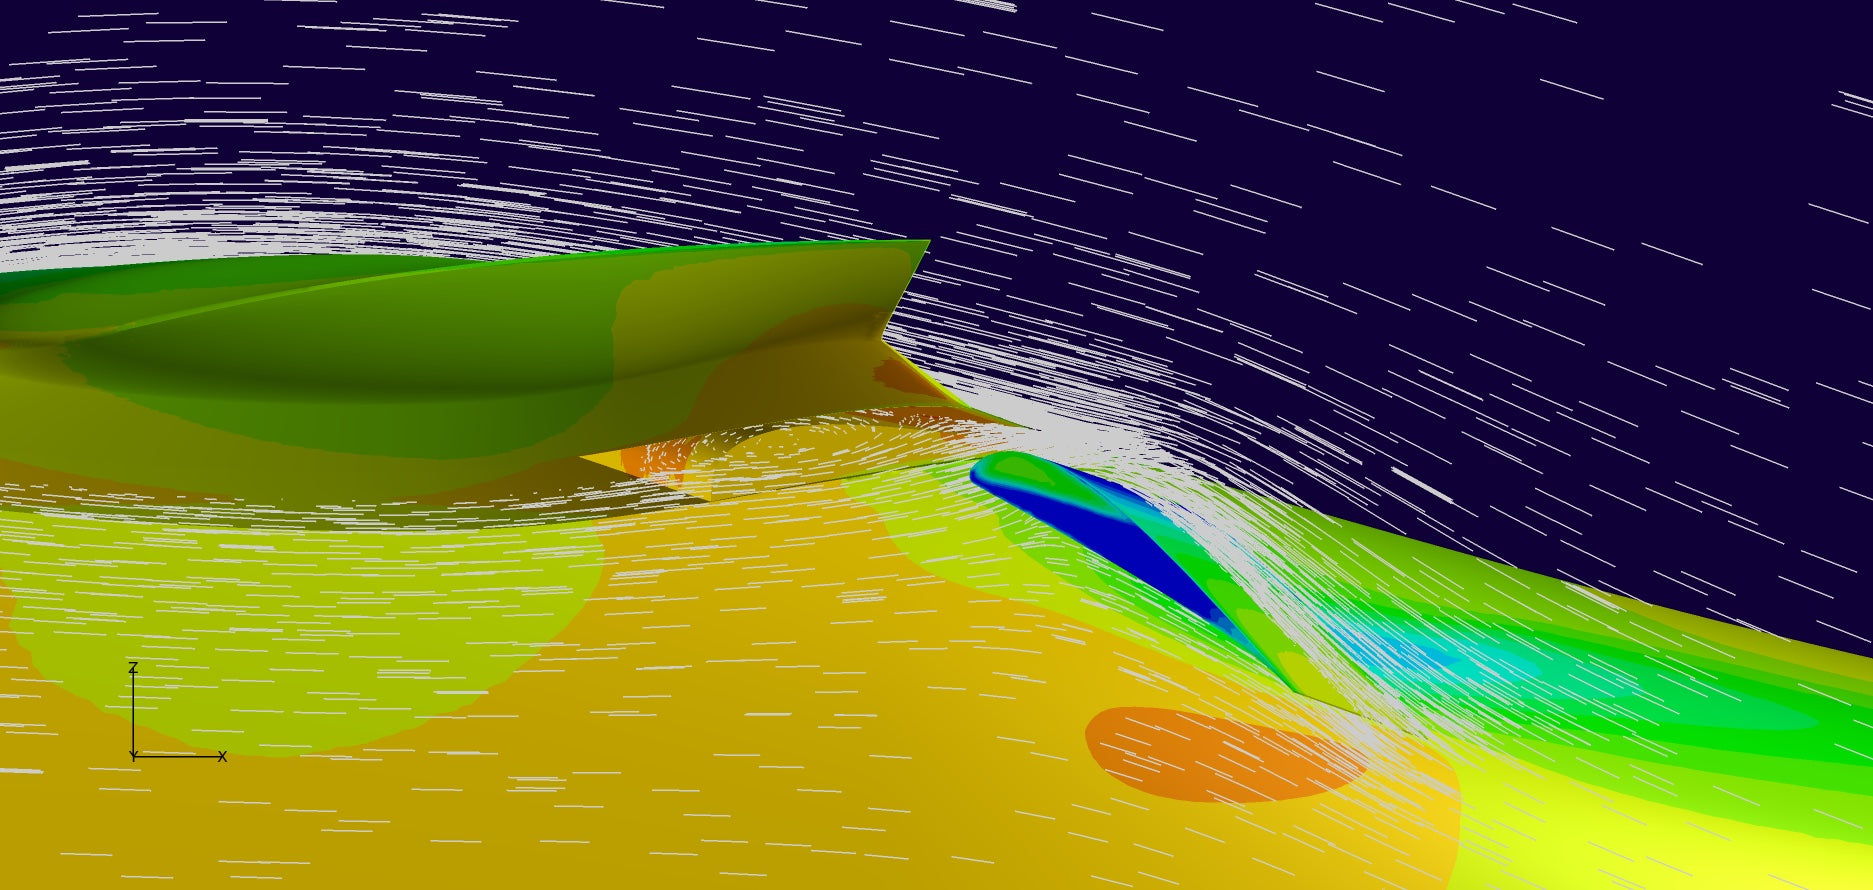 cfd airflow over wing